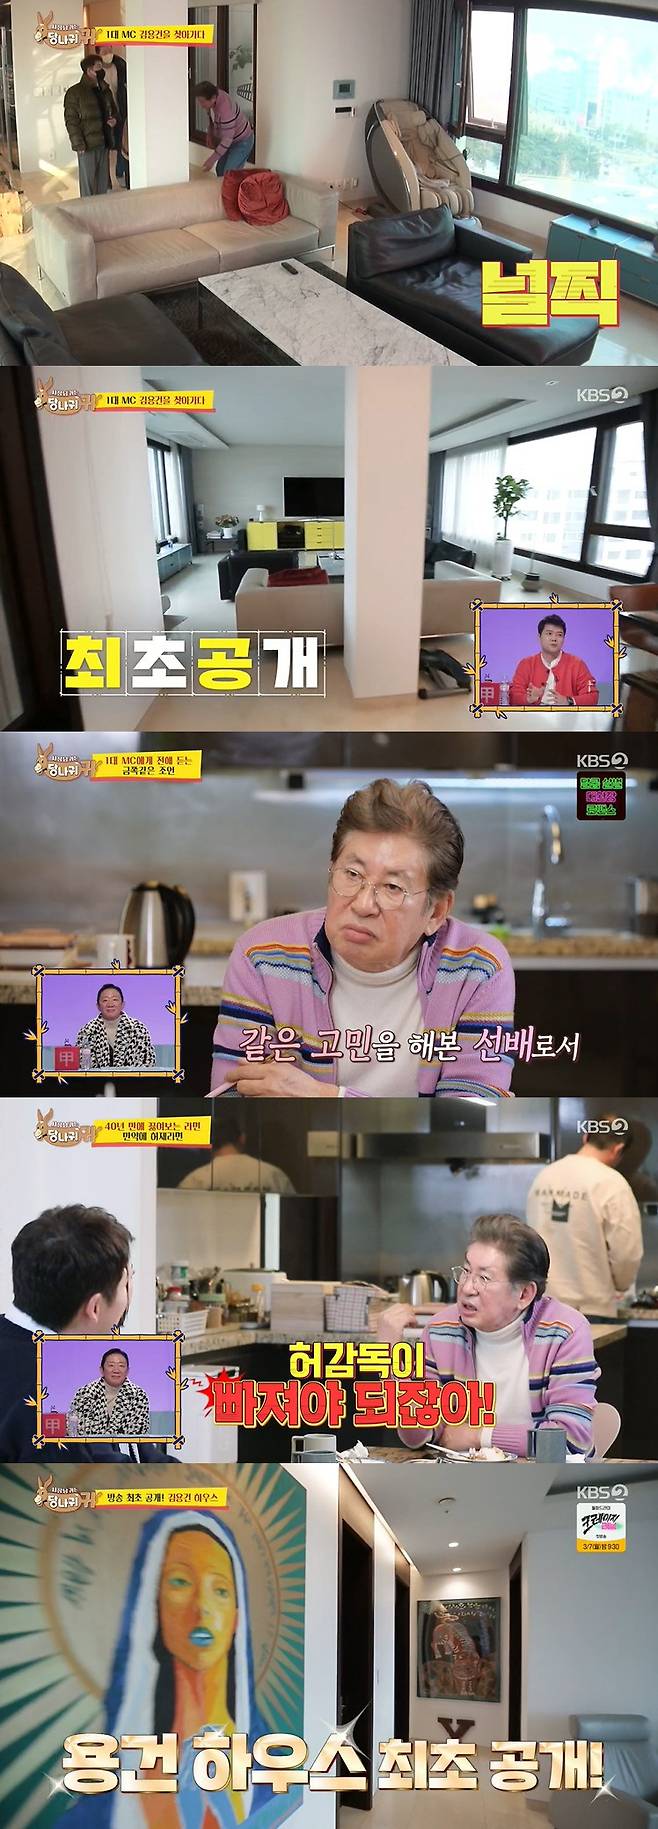 Donkey ears Kim Yong-guns billion sounding house was first unveiled.On the 27th KBS2 entertainment program Boss in the Mirror, a new house of actor Kim Yong-gun was released.Jun Hyun-moo and Kim Sook took extraordinary steps to train their youngest MC Hur Jae; the three people found the one major MC Kim Yong-guns house.During the recording, Jun Hyun-moo and Kim Sook called Kim Yong-gun for a greeting, and Kim Yong-gun was greedy to return to I want to go there and go back there.So the meeting of four people was concluded.While Hur Jae boiled ramen, Kim Sook asked Kim Yong-gun, You should return again, surreptitiously; Kim Yong-gun said, I dont mind.Then Huh should not be out, and Hur Jae said, I am bright in my ears. After dinner, I looked around the house in earnest, and I could see the city view in the bedroom, and the hallway to the dressing room was full of galleries.Among them was one of Kim Sooks favorite writers, one of the authors of One One, who was surprised that Kim Sook draws a billion-dollar work.Kim Yong-gun expressed his attachment to the work, saying, I always saw and prayed when there was a hard time in A Year Ago in Winter.The closet of fashionista Kim Yong-gun has also been unveiled.Kim Yong-gun presented Kim Sook with a new dress that he never wore as soon as he entered the dressing room. The cashmere 100% coat he gave to Jun Hyun-moo was 6.8 million One.I wasnt feeling well, I thought Id go on a diet from the start - I should be fitted to my clothes, Jun Hyun-moo said.